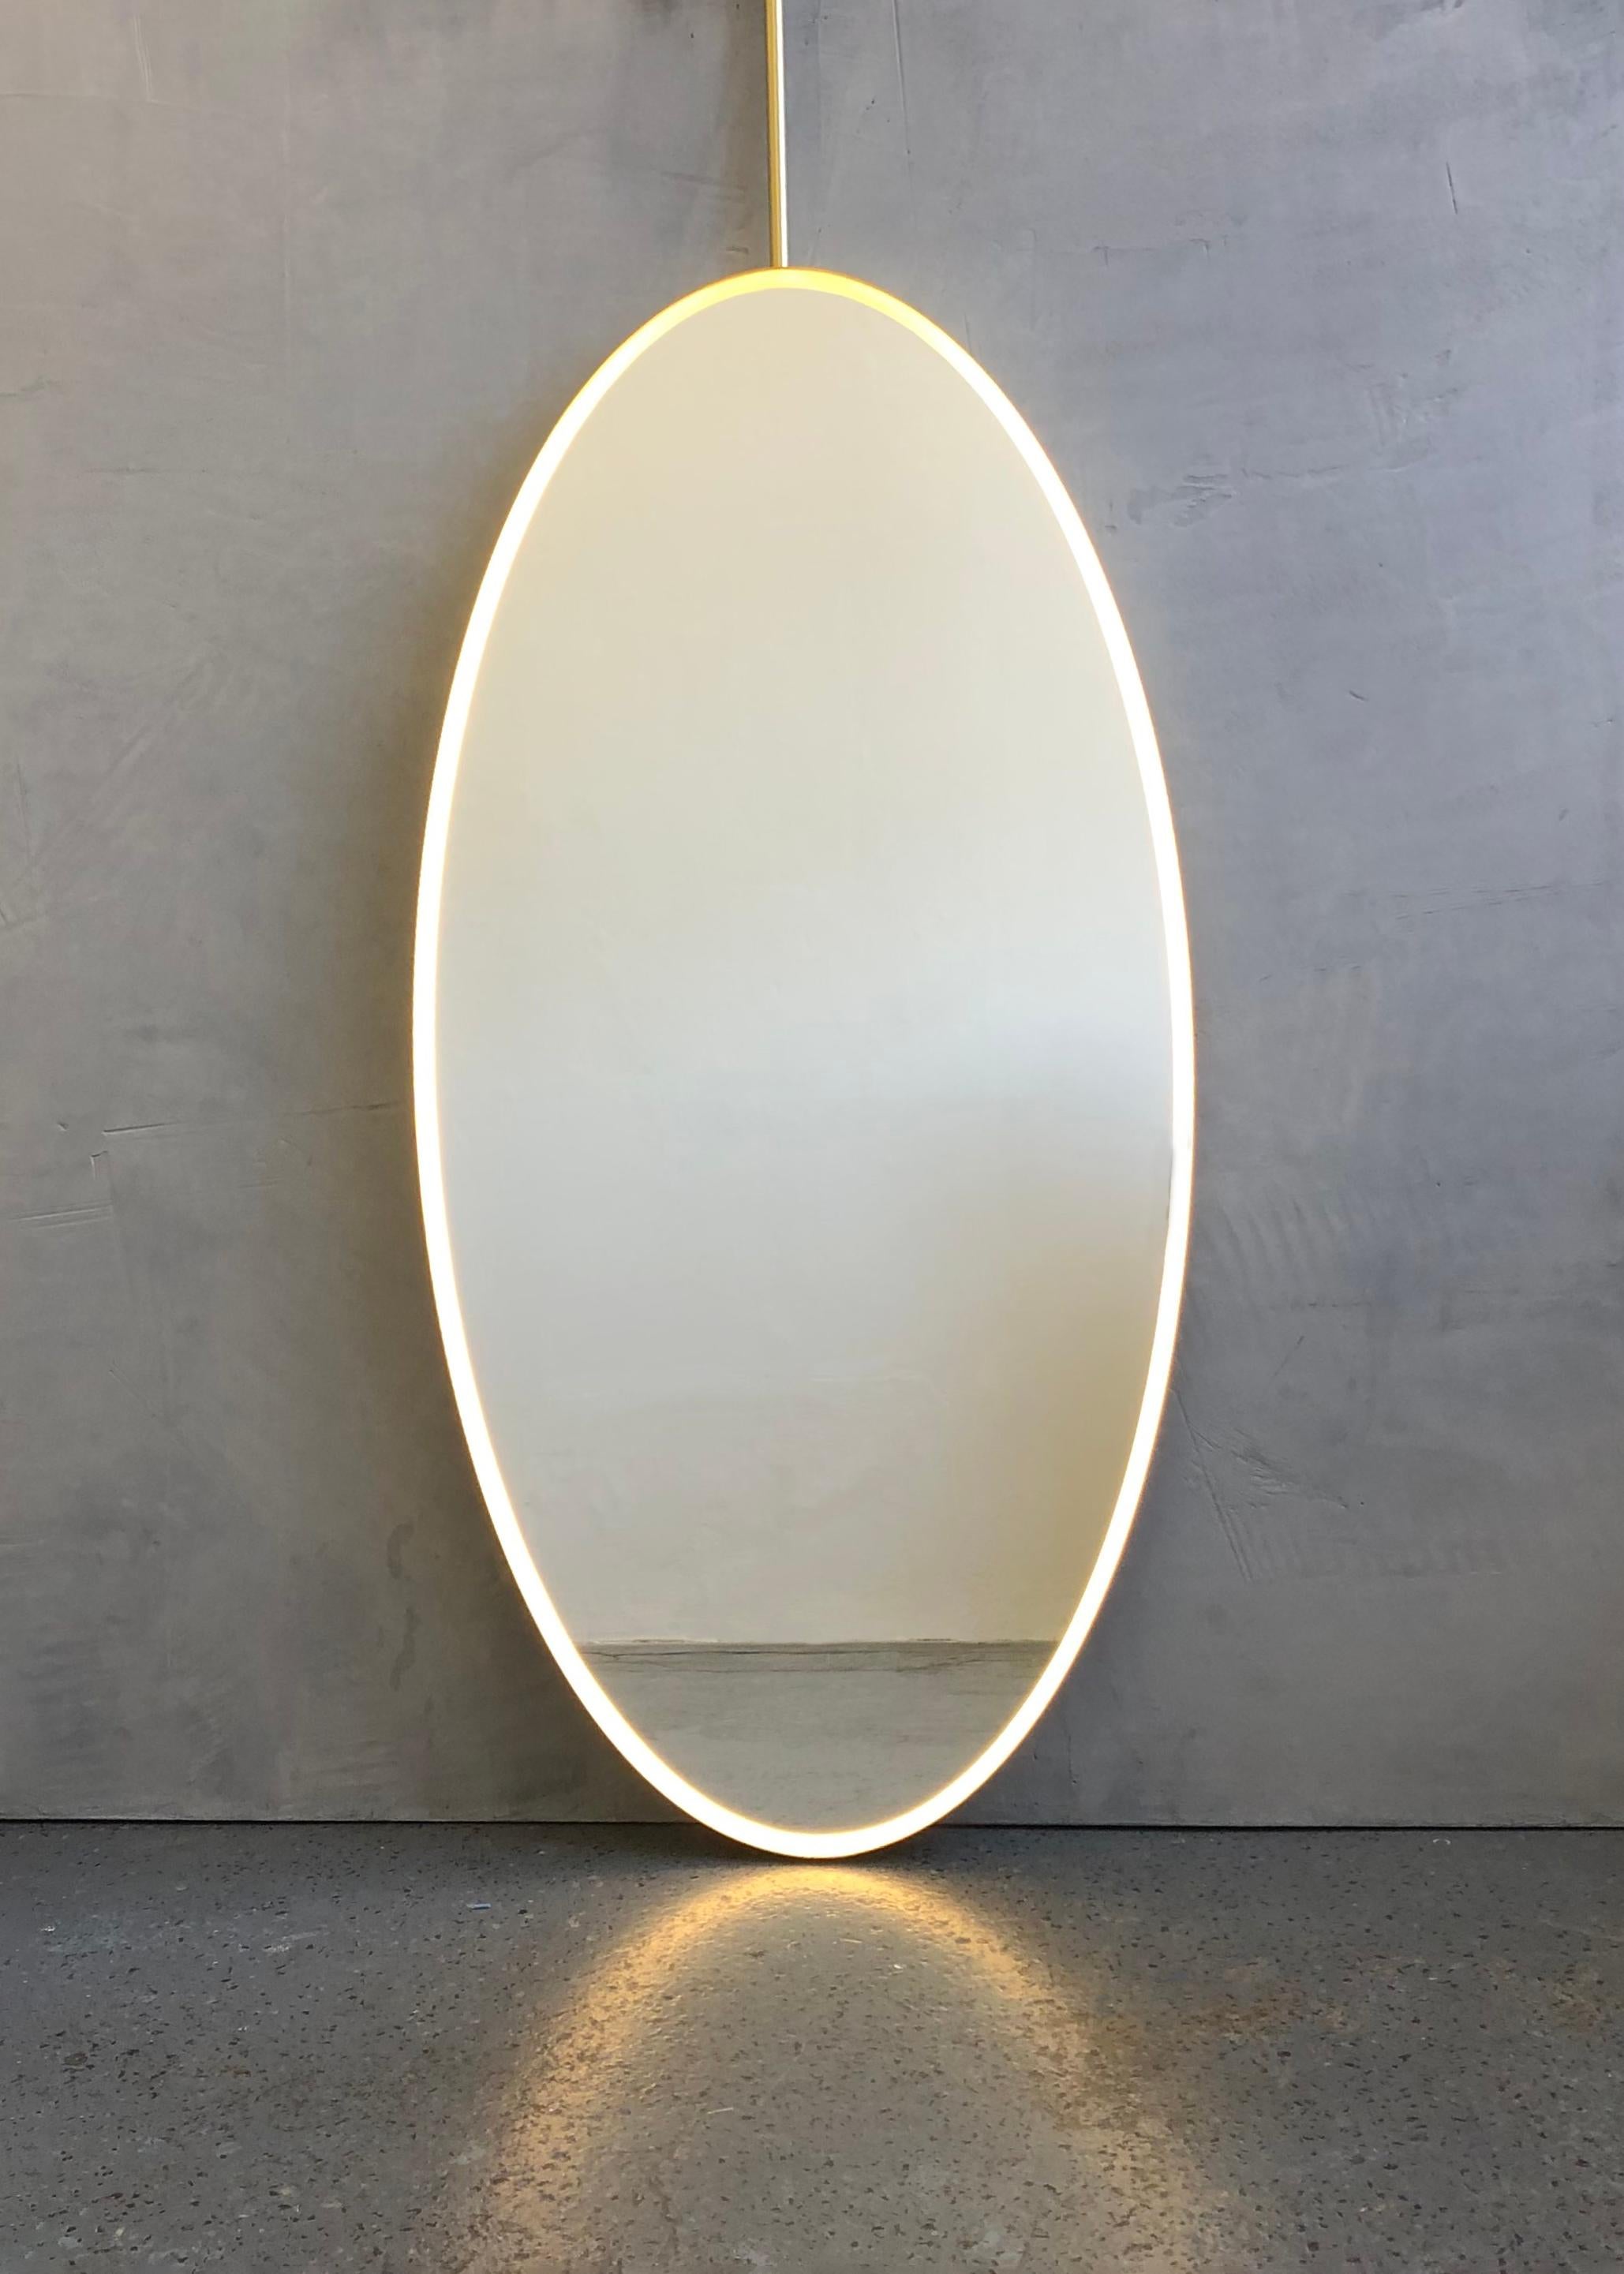 The images in this personal entry illustrate a standard size of the suspended Ovalis™ mirror with a brushed brass frame and one rod. All specifications for this particular entry are as detailed in the presentation already provided and approved.

The